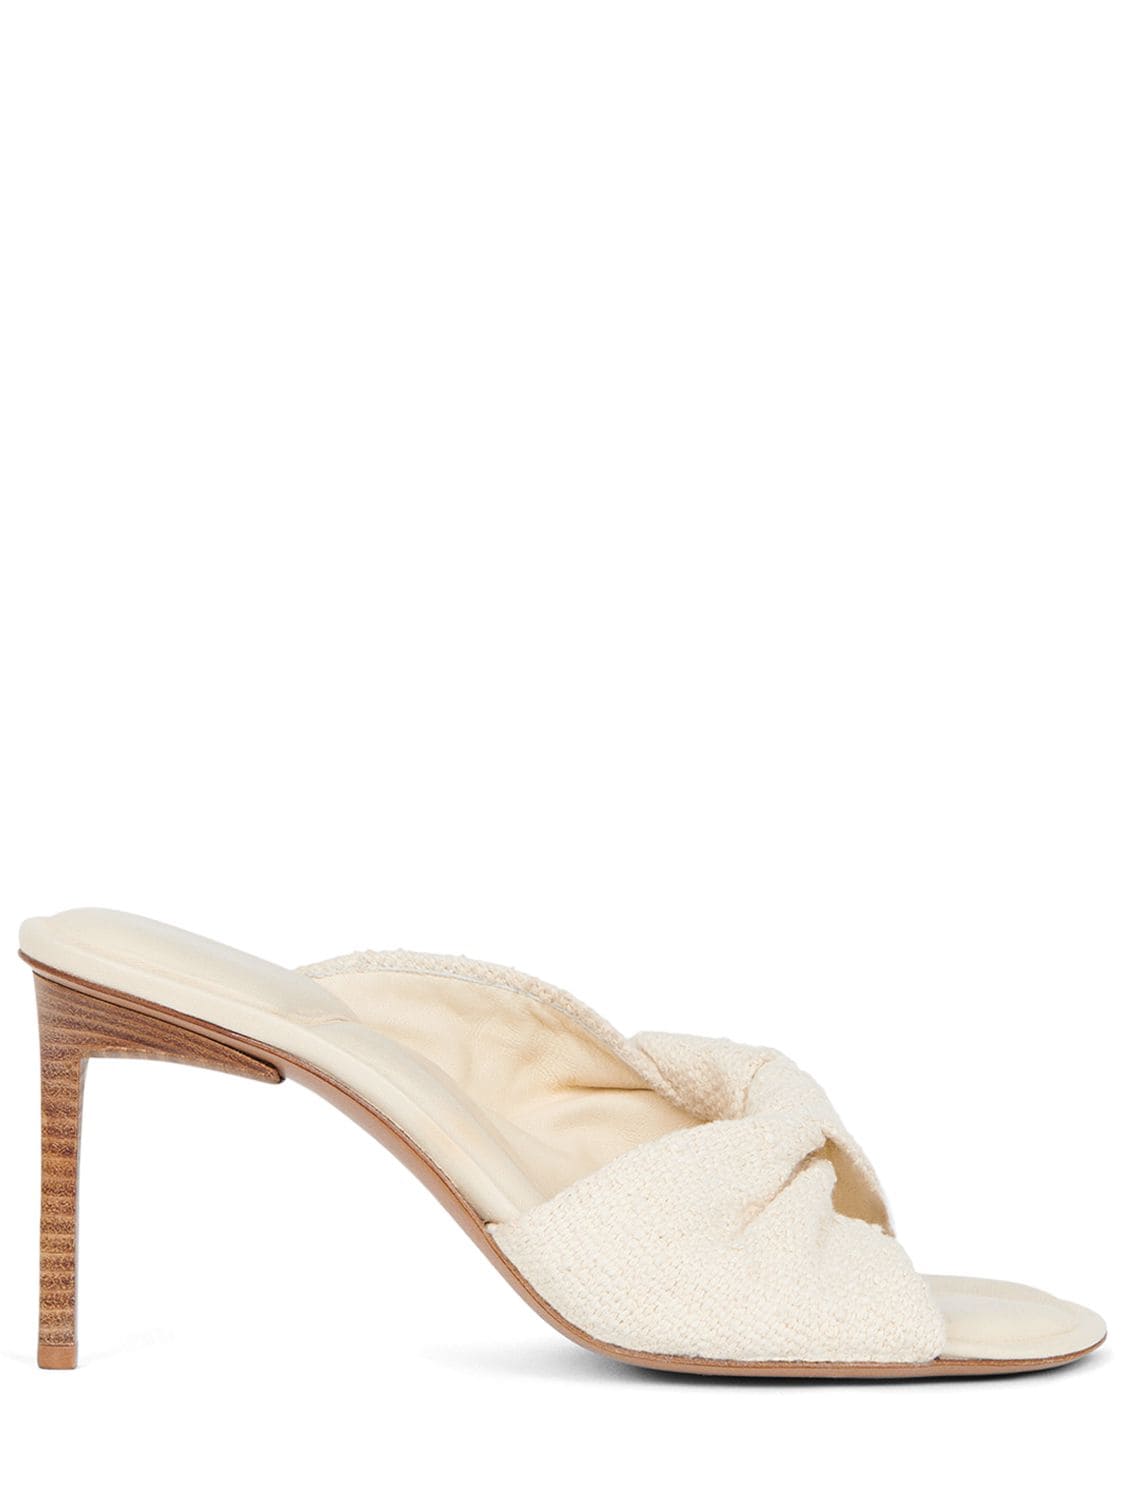 Jacquemus Les Mules Bagnu Twisted Cotton Sandals In Off White | ModeSens